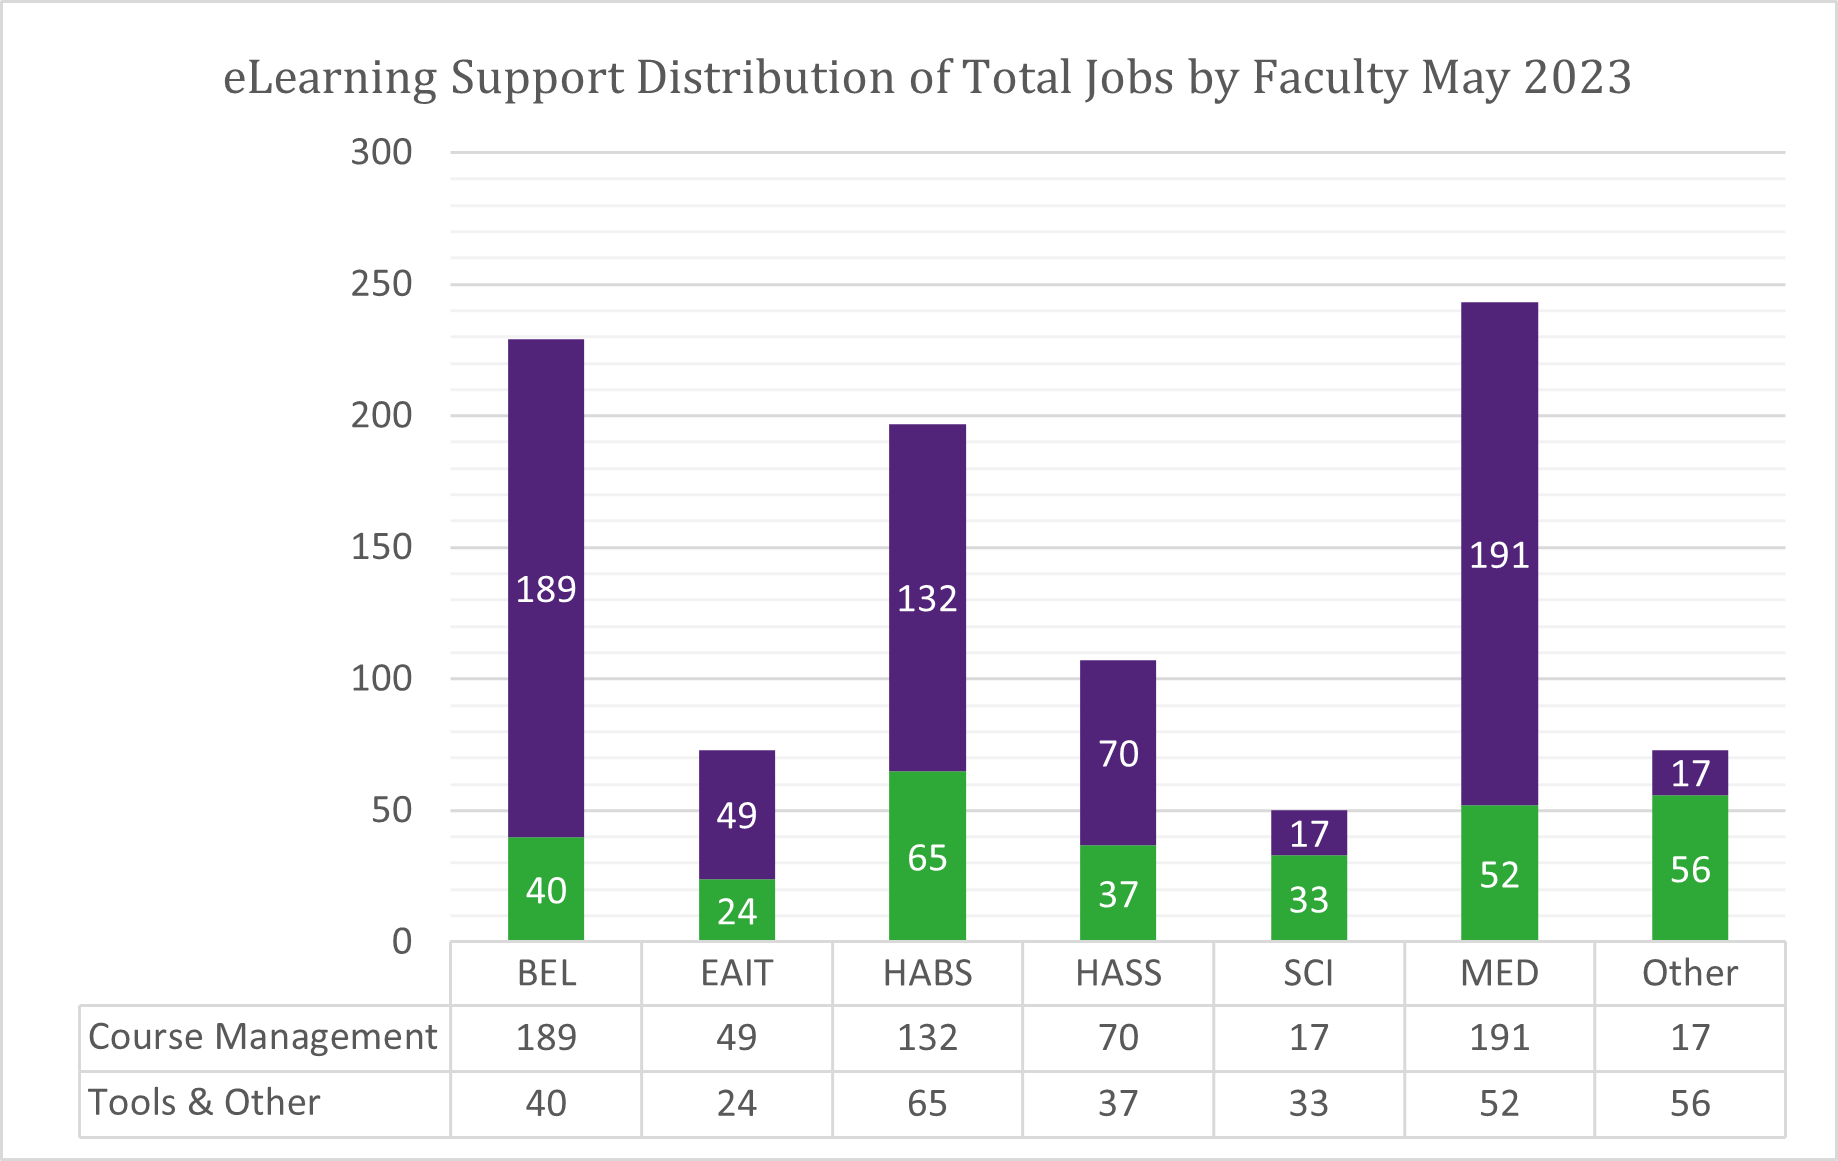 Chart of Total Jobs by Faculty for May 2023